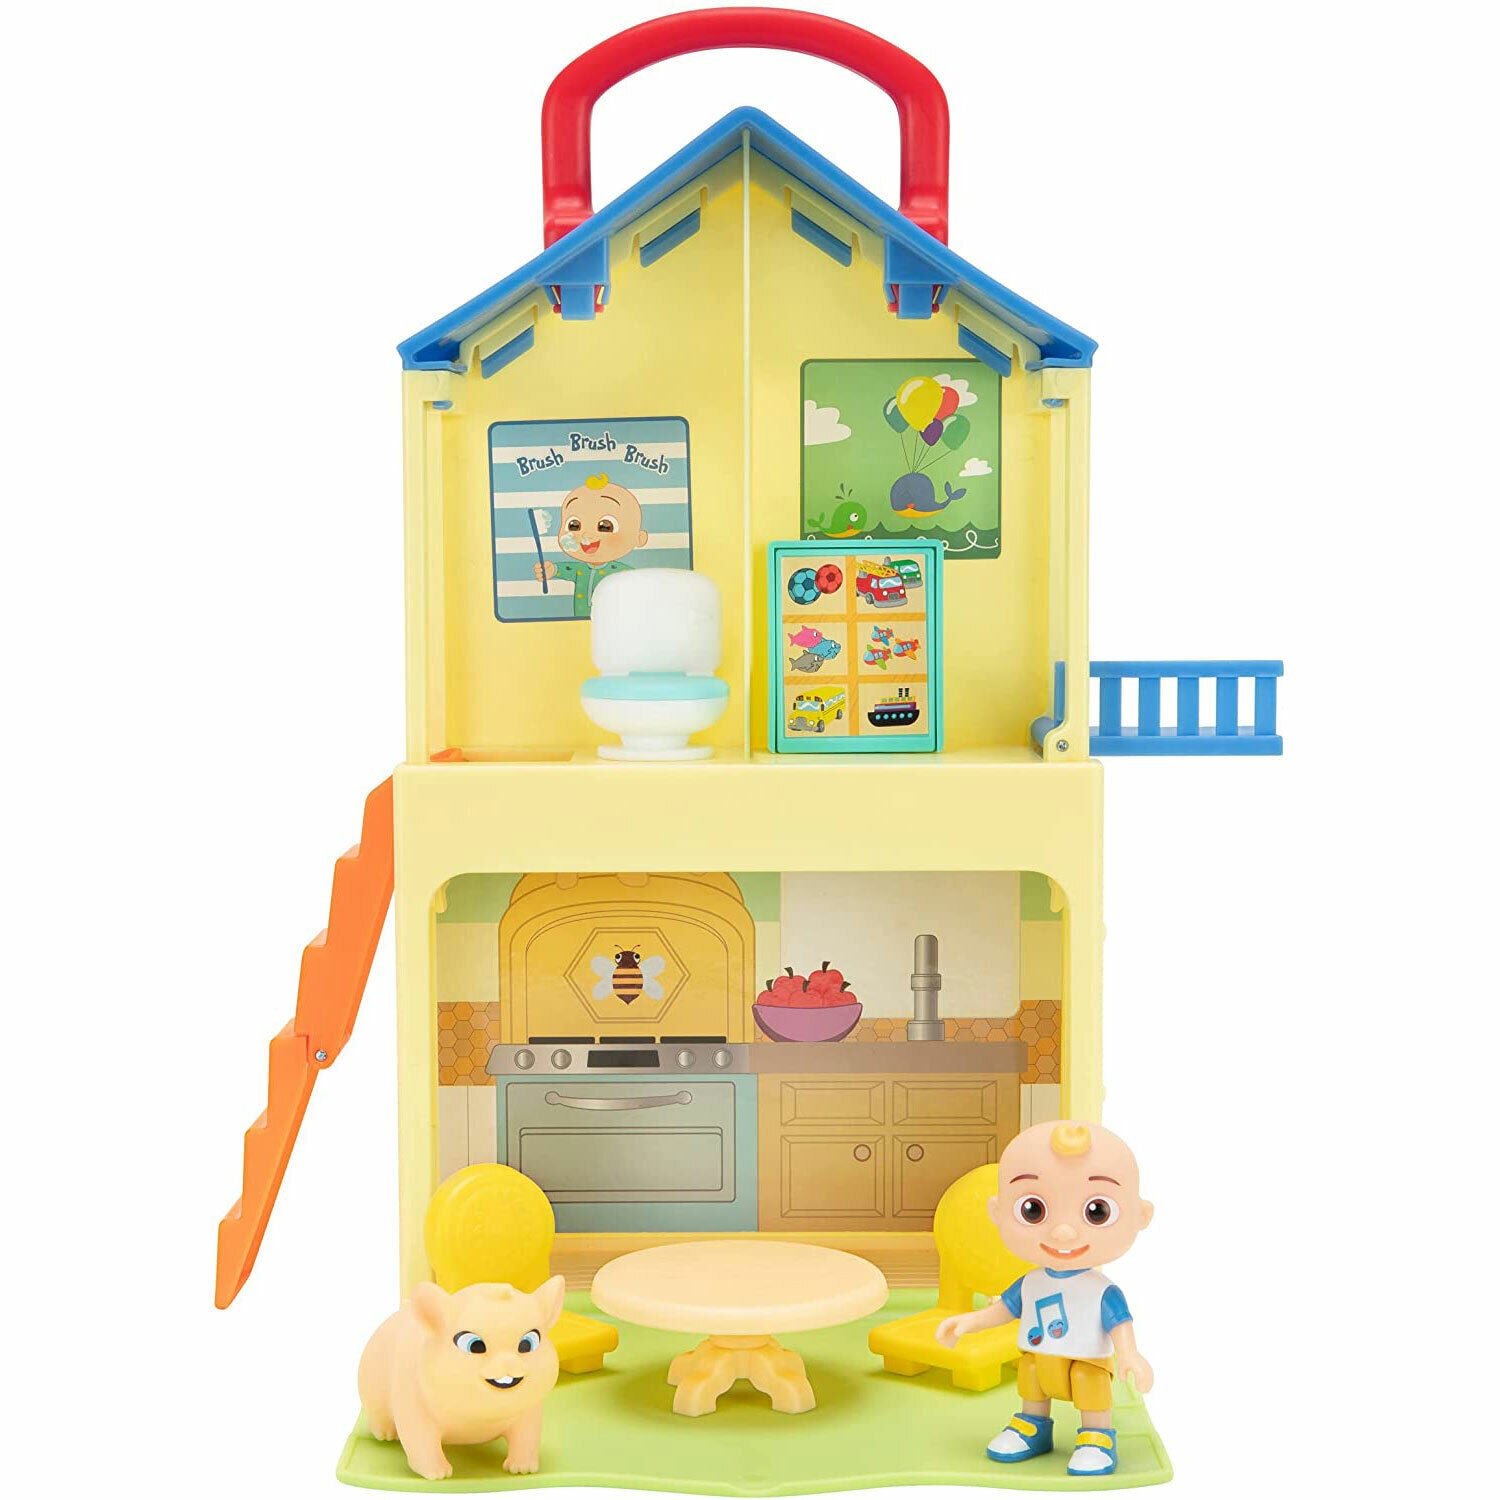 New CoComelon Pop N' Play House Playset - Fun for Kids!